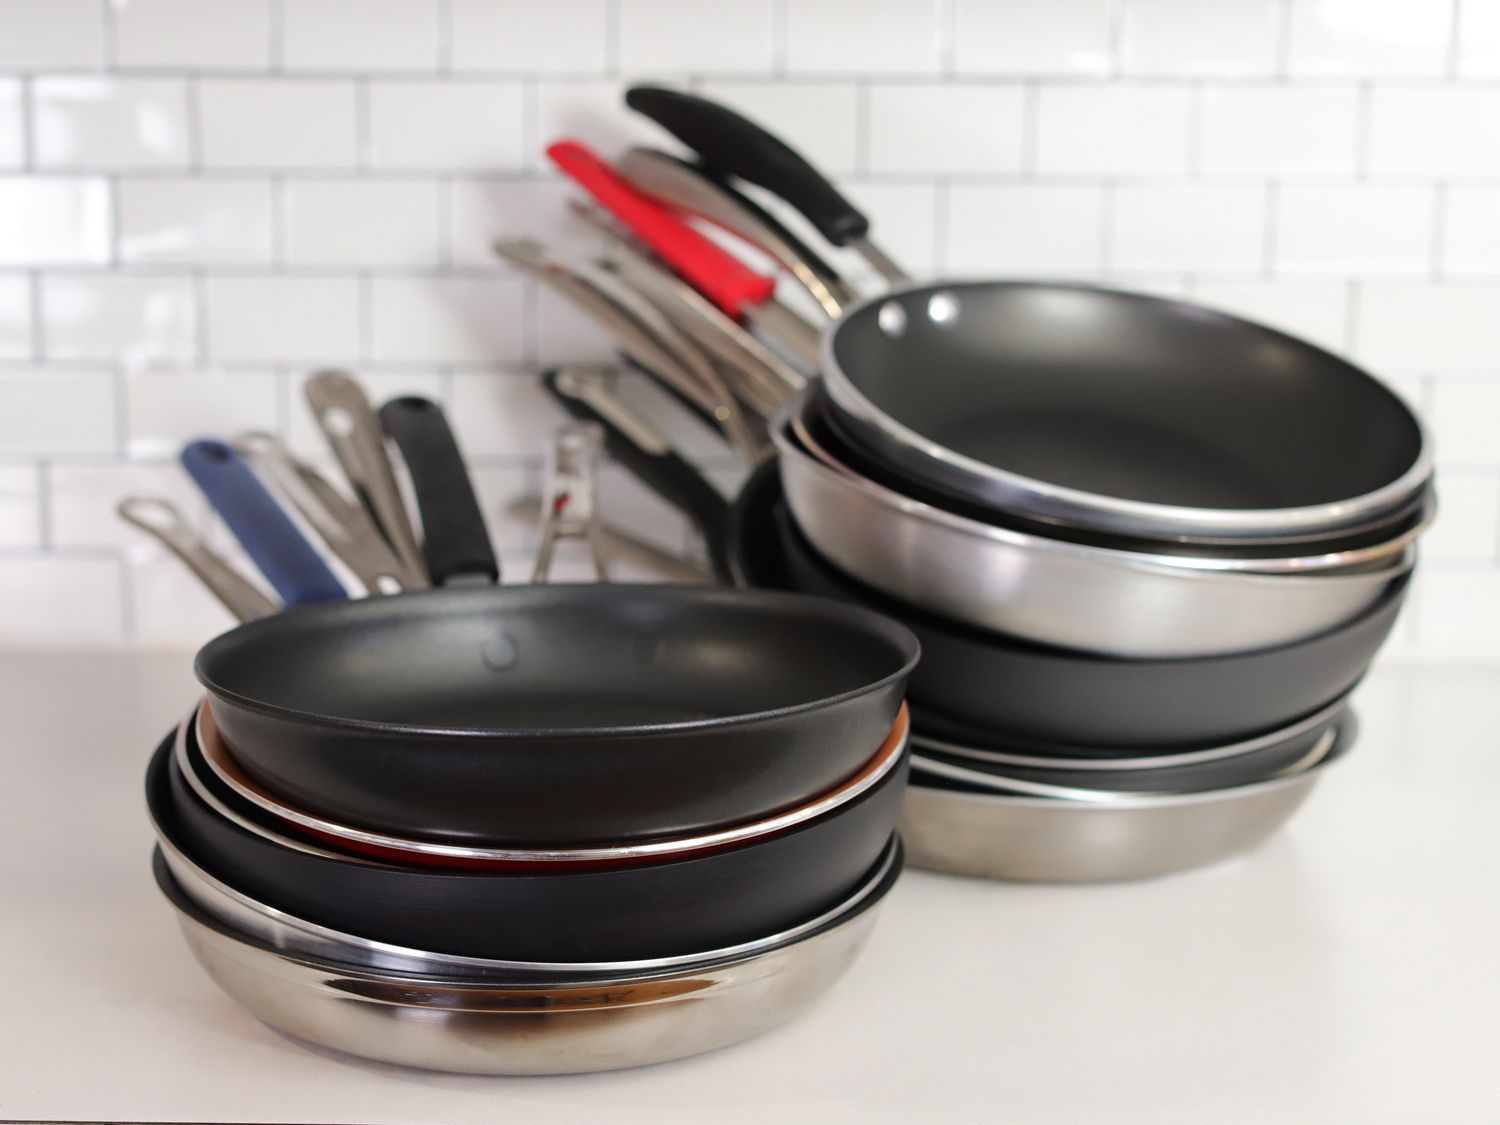 two stacks of various nonstick skillets against a white background